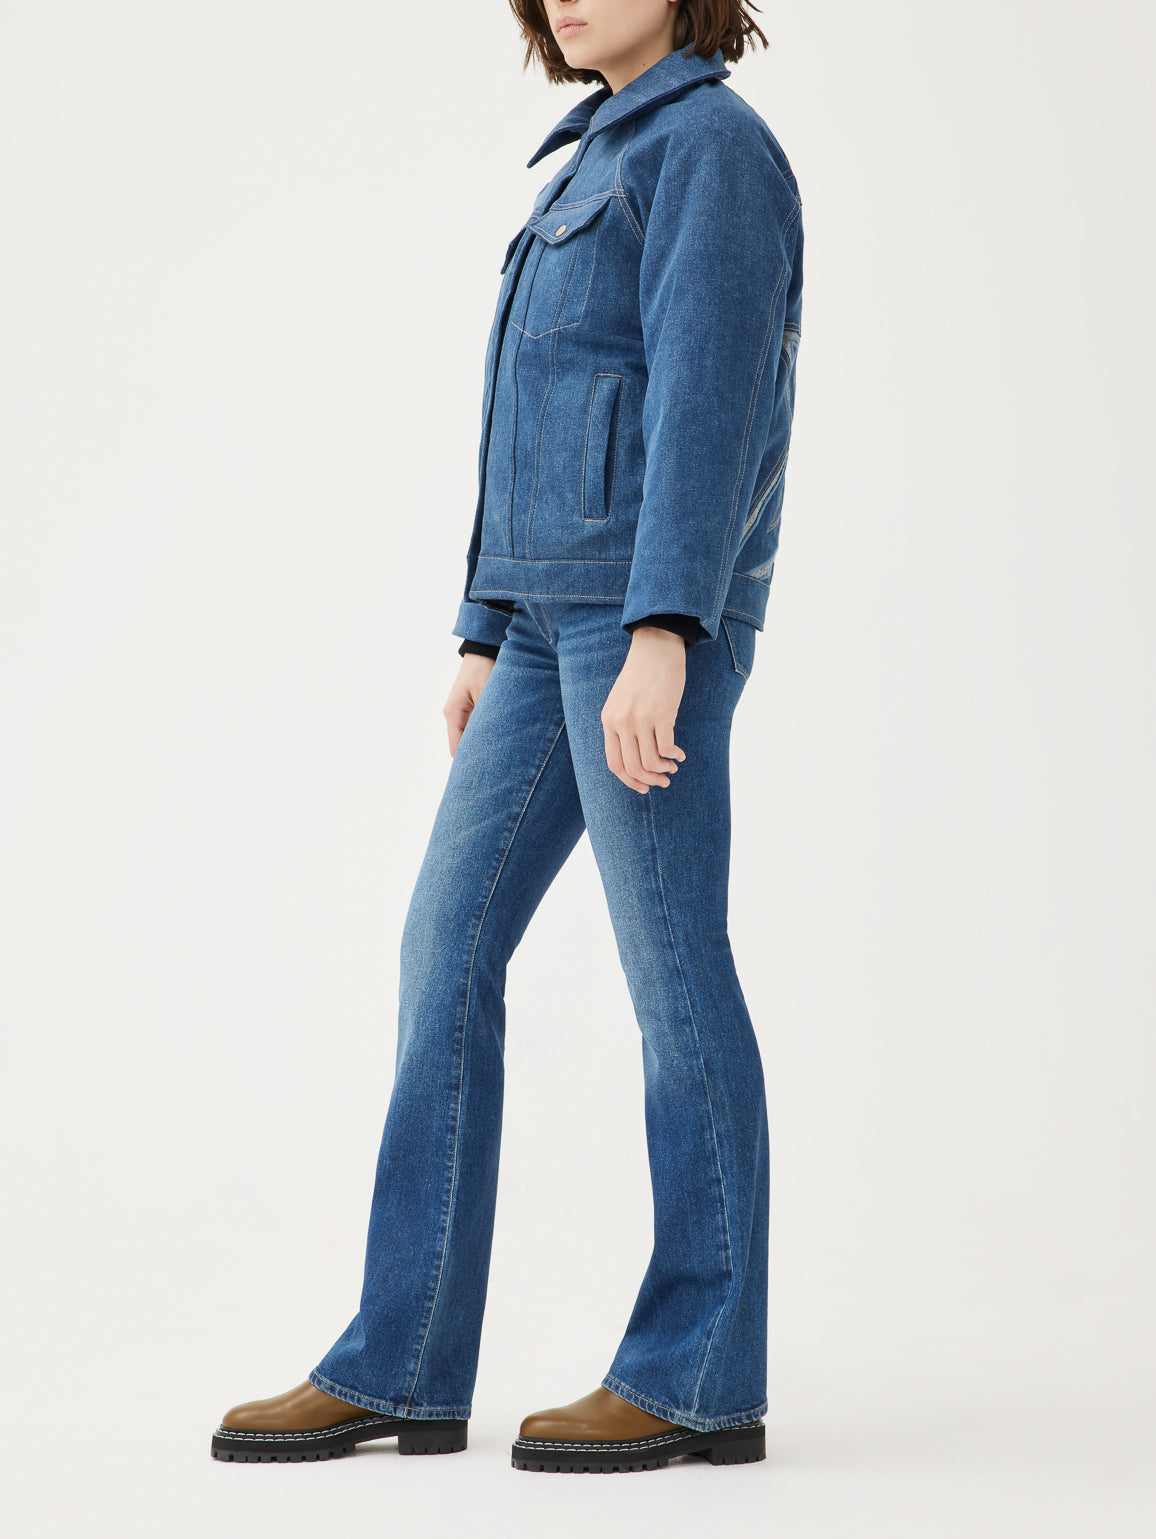 Perfect Moment and Denim Collection 2022 — Launch DL1961 Sustainable Outfits Ski Skiwear Denim